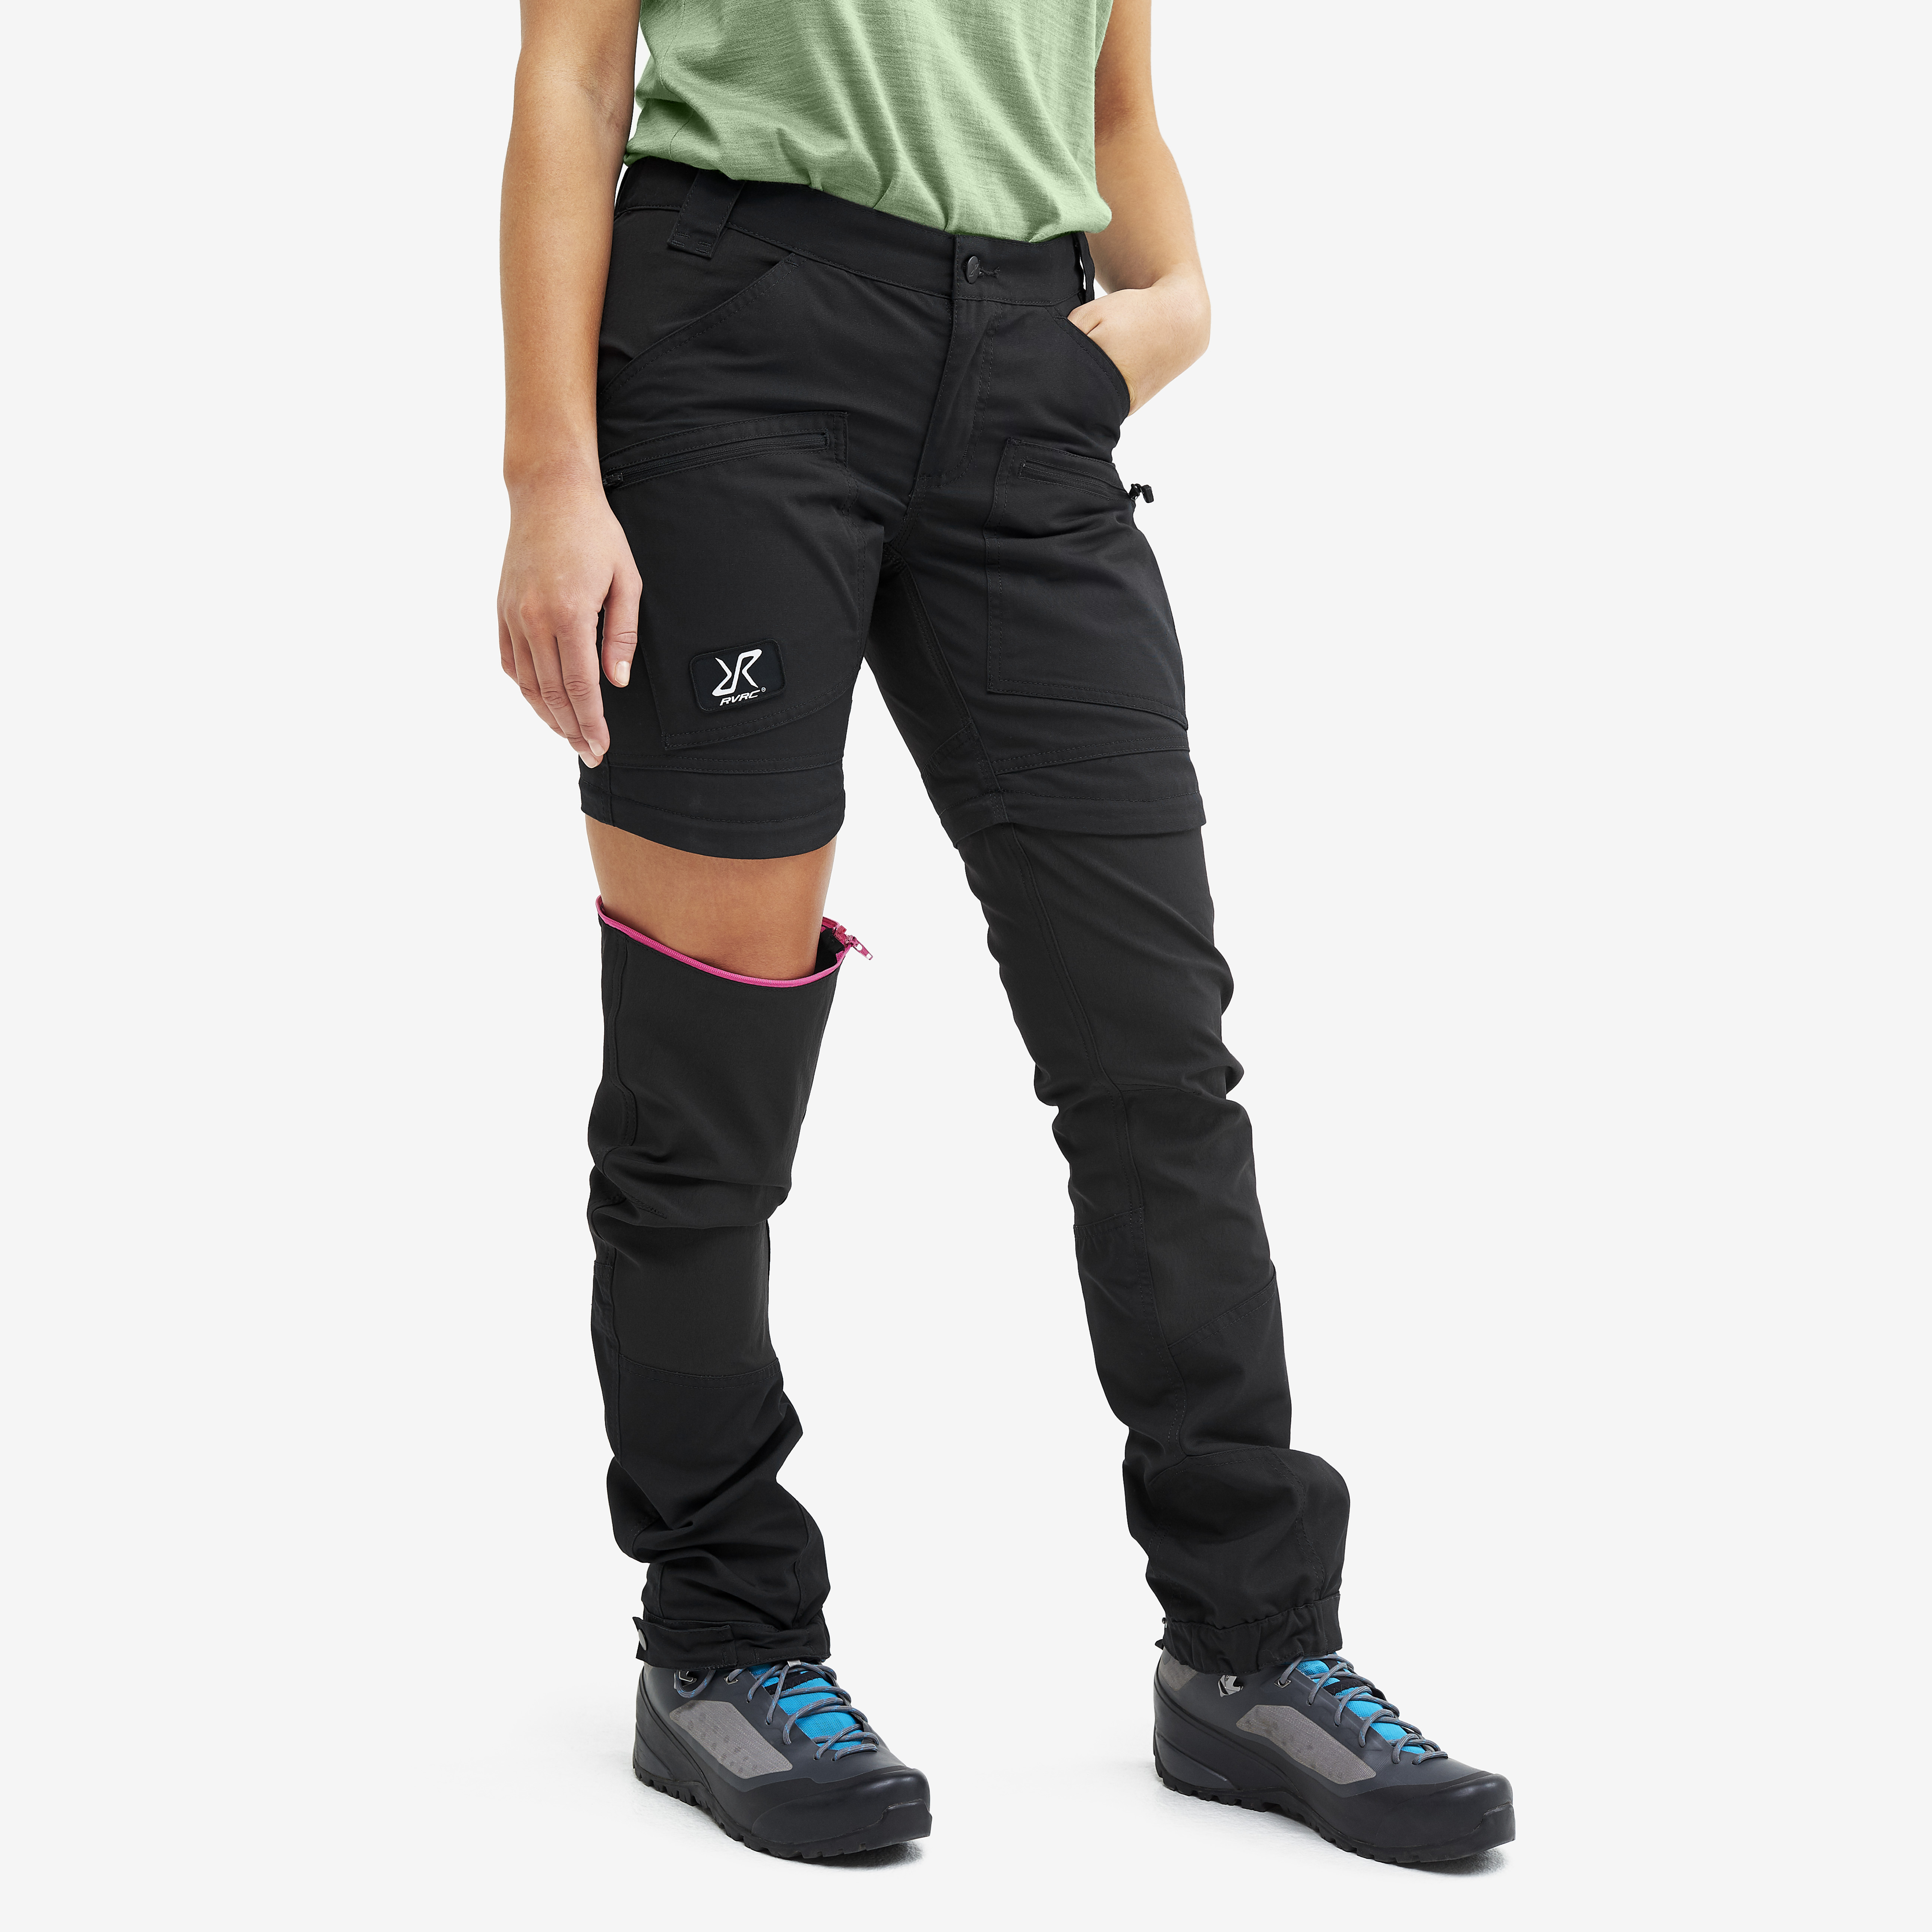 Nordwand Pro Zip-off hiking trousers for women in black